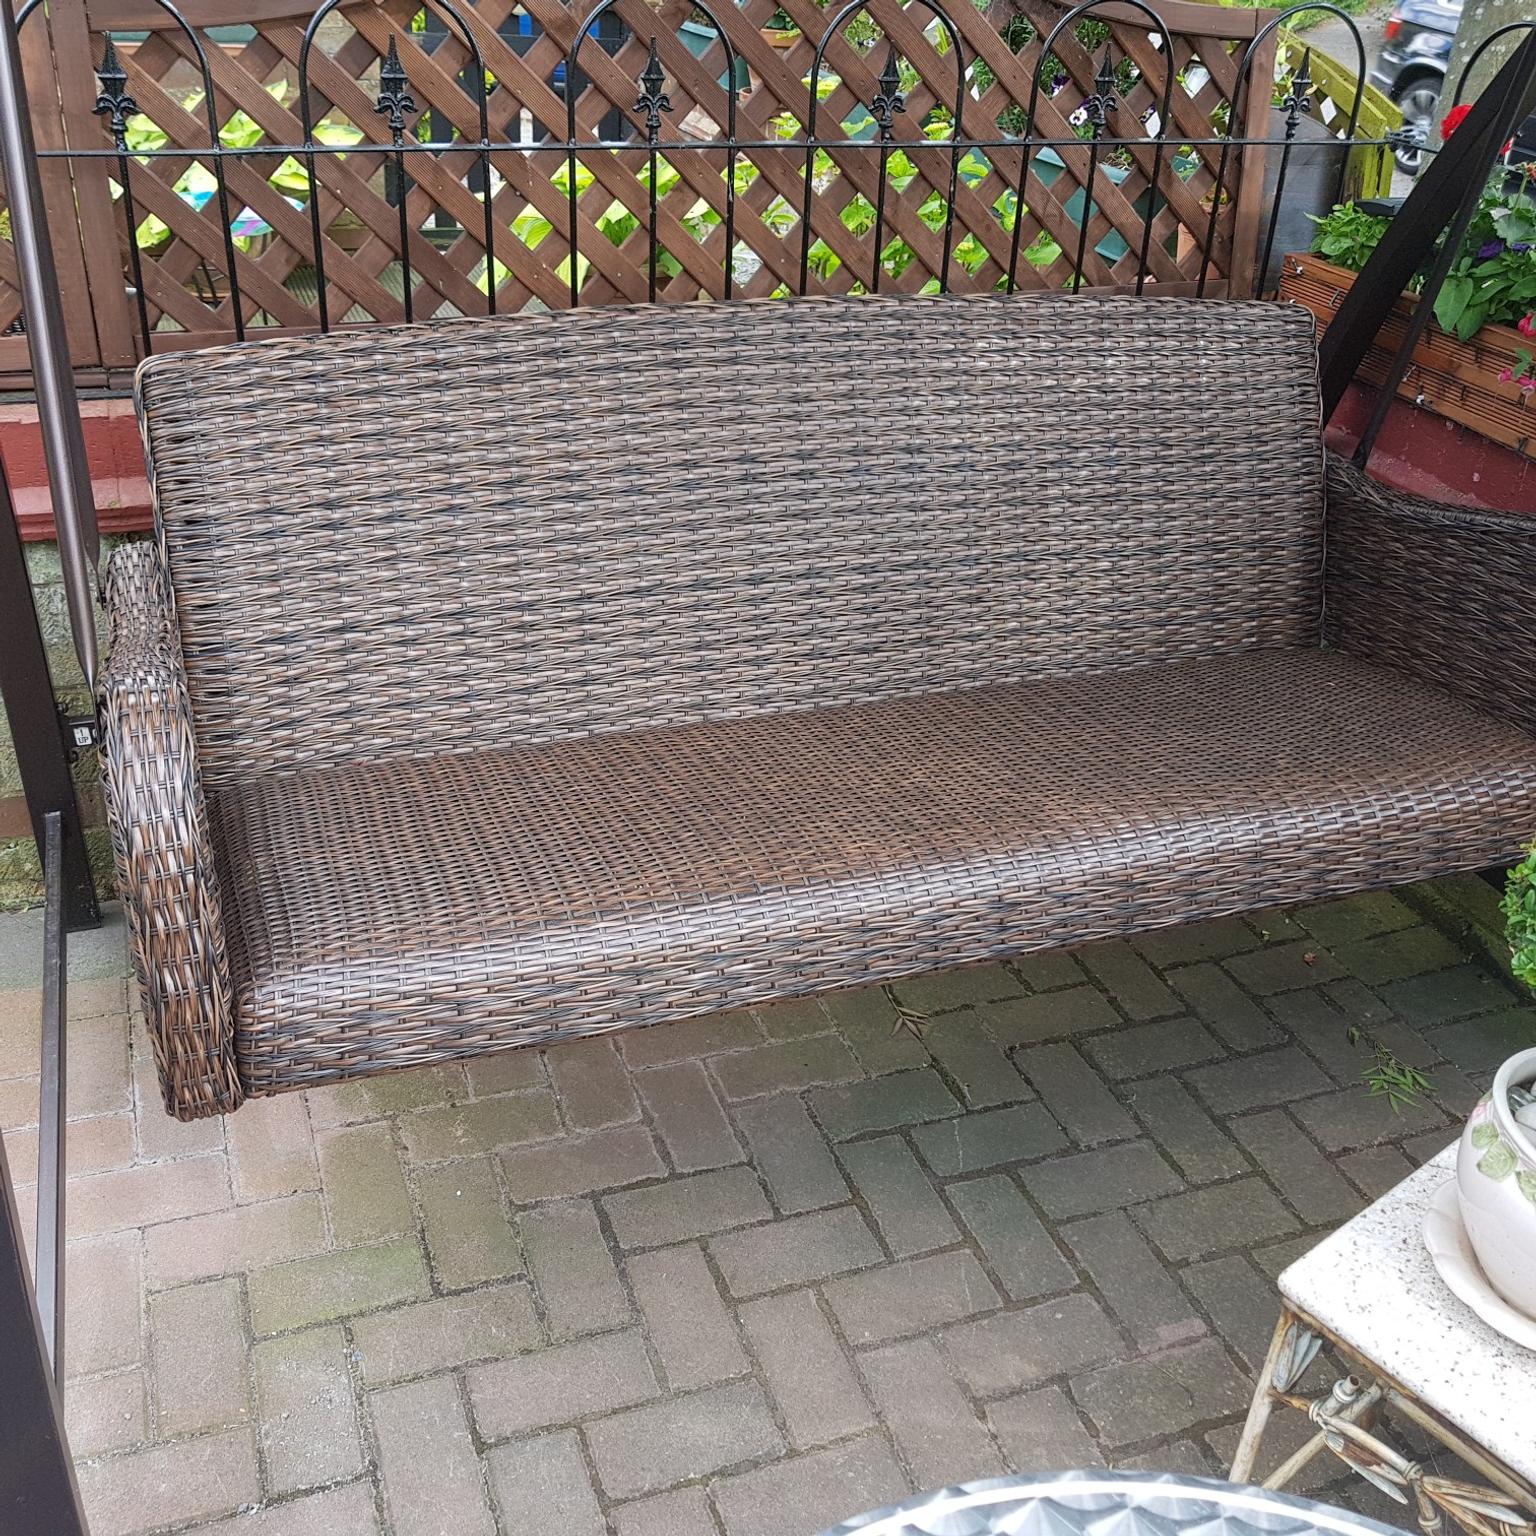 COSTCO 3 Seater Garden Swing Chair in Wolverton for £250